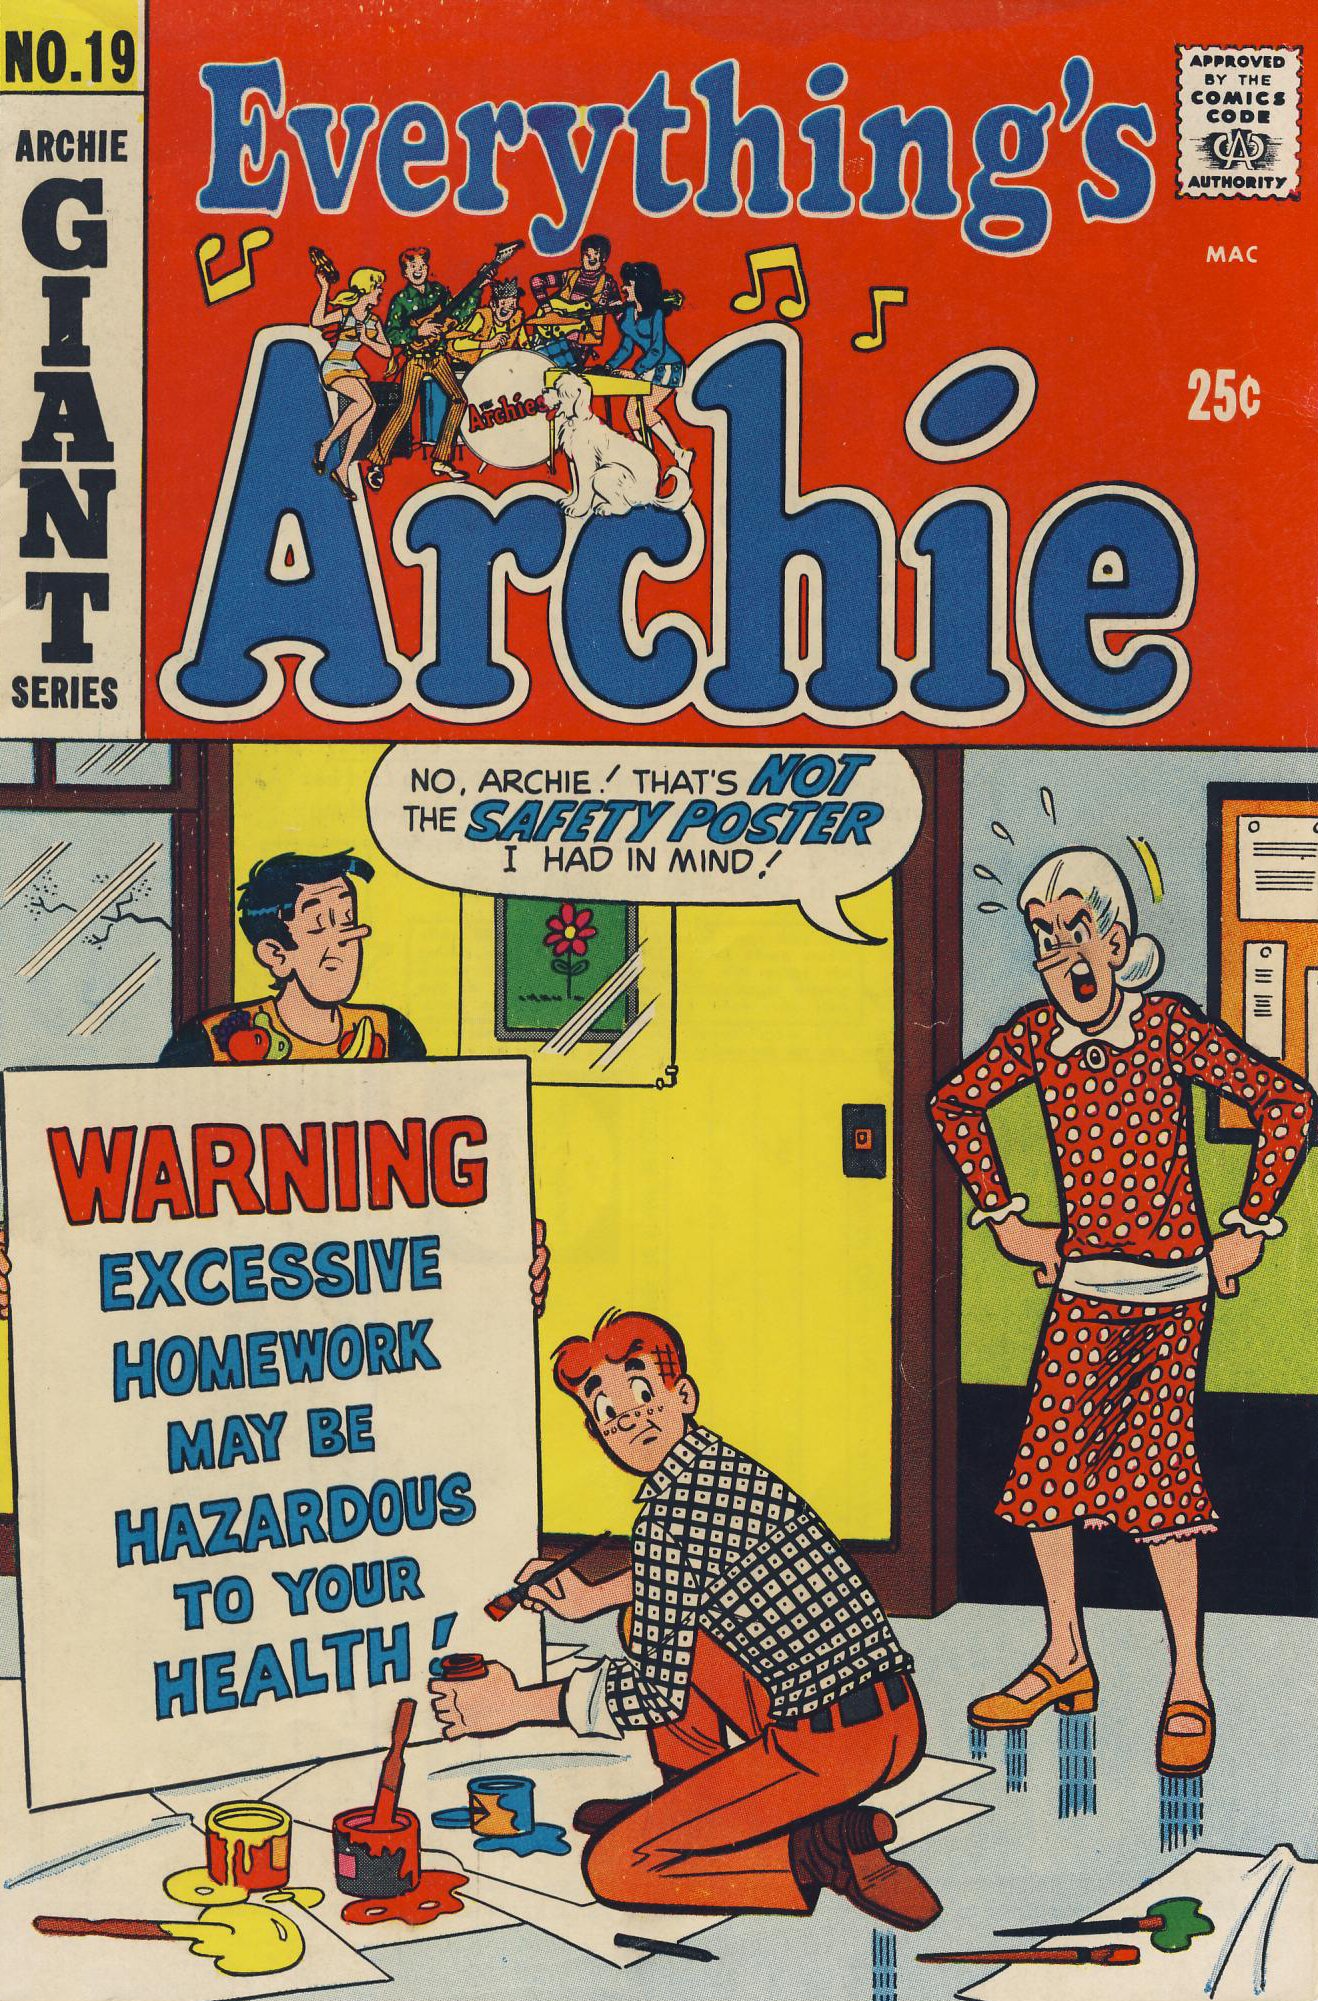 Read online Everything's Archie comic -  Issue #19 - 1